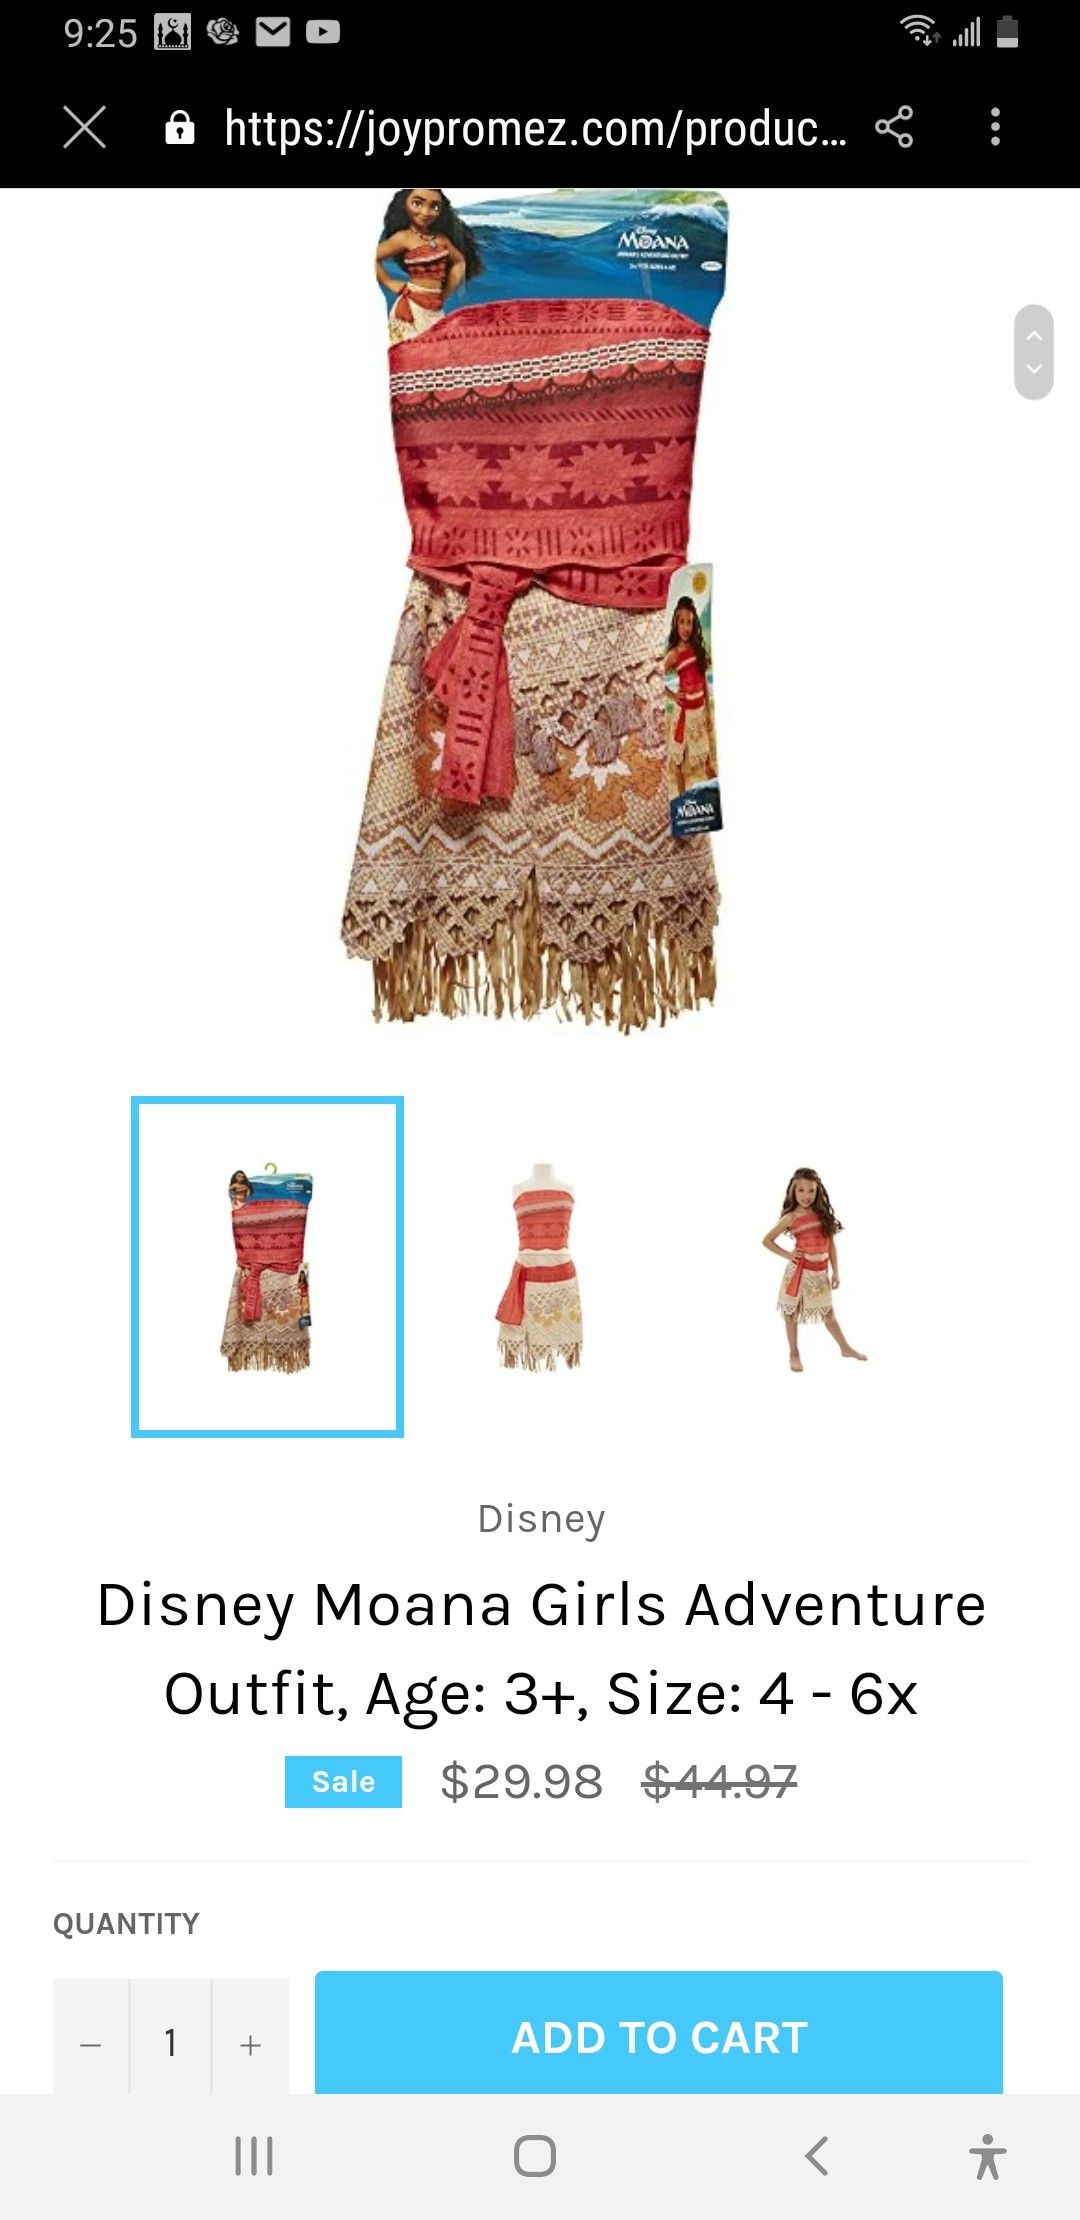 Disney Moana Girls Adventure Outfit Costume, Size 4-6X With Disney Princess Moana Magical Seashell Necklace New